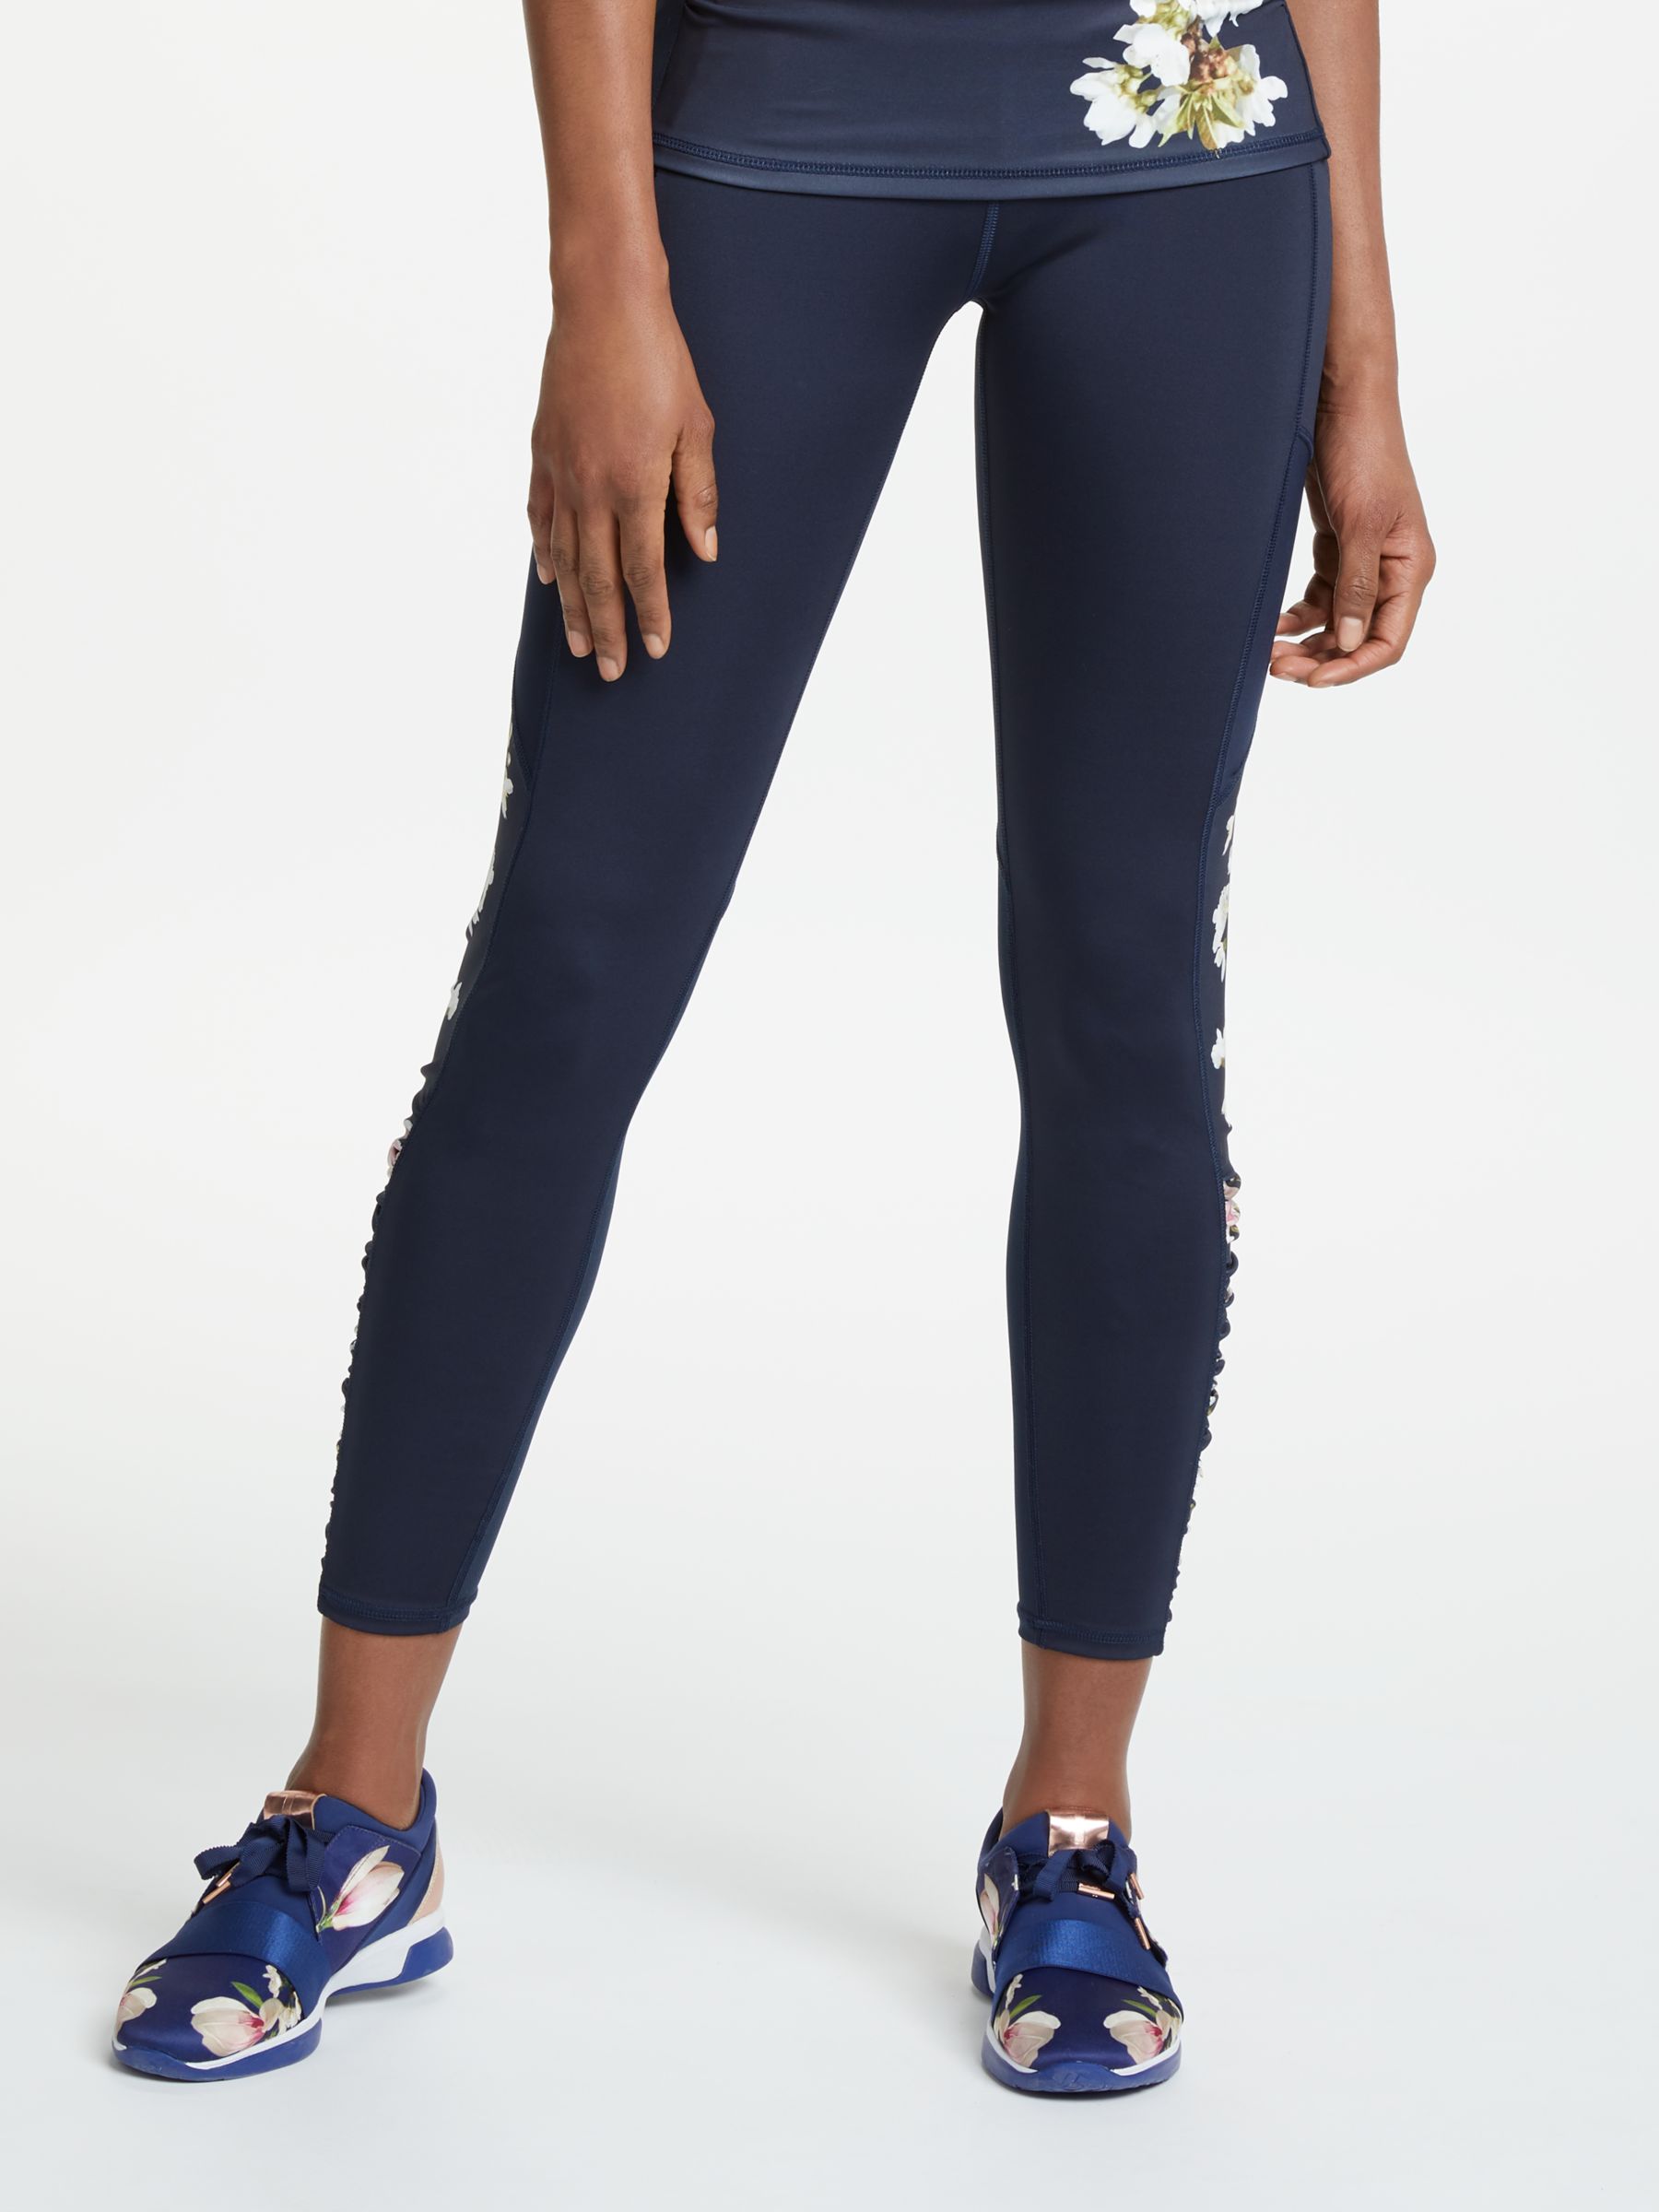 Ted Baker Fit to a T Isaace Harmony Ruched Long Leggings, Navy